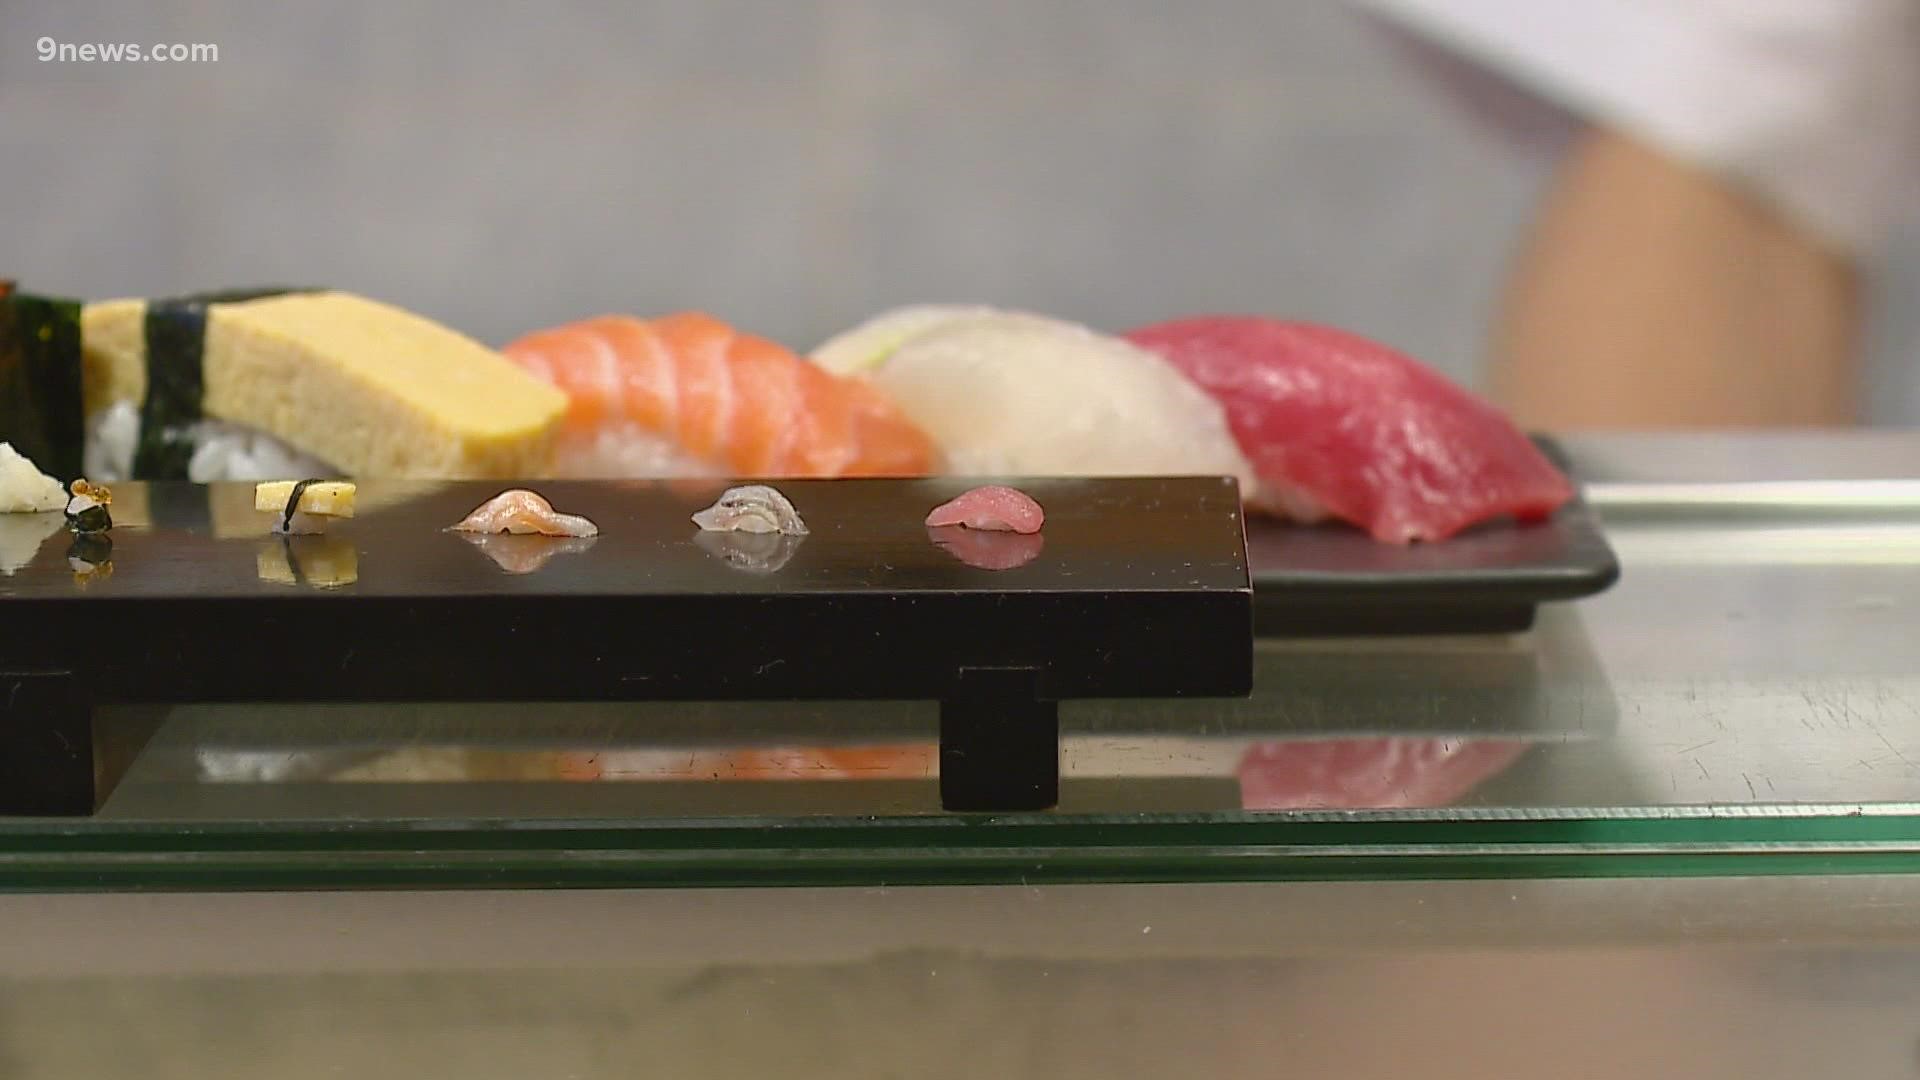 One chef in Tokyo is giving athletes a tiny taste of Japanese culture by serving up micro sushi.